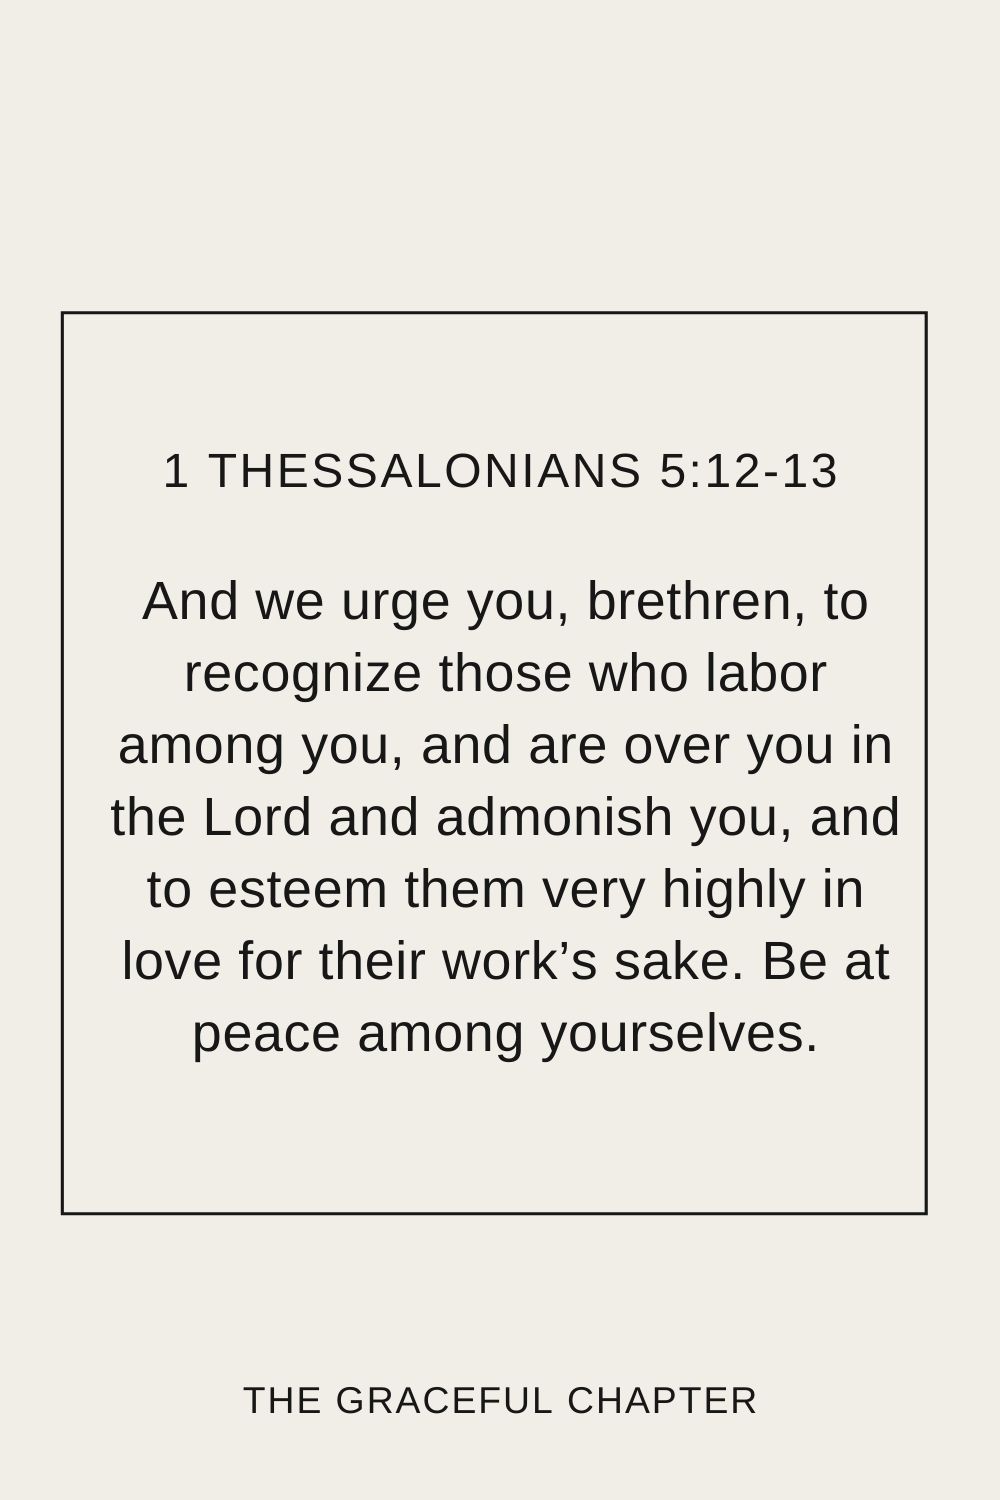 And we urge you, brethren, to recognize those who labor among you, and are over you in the Lord and admonish you, and to esteem them very highly in love for their work’s sake. Be at peace among yourselves. 1 Thessalonians 5:12-13